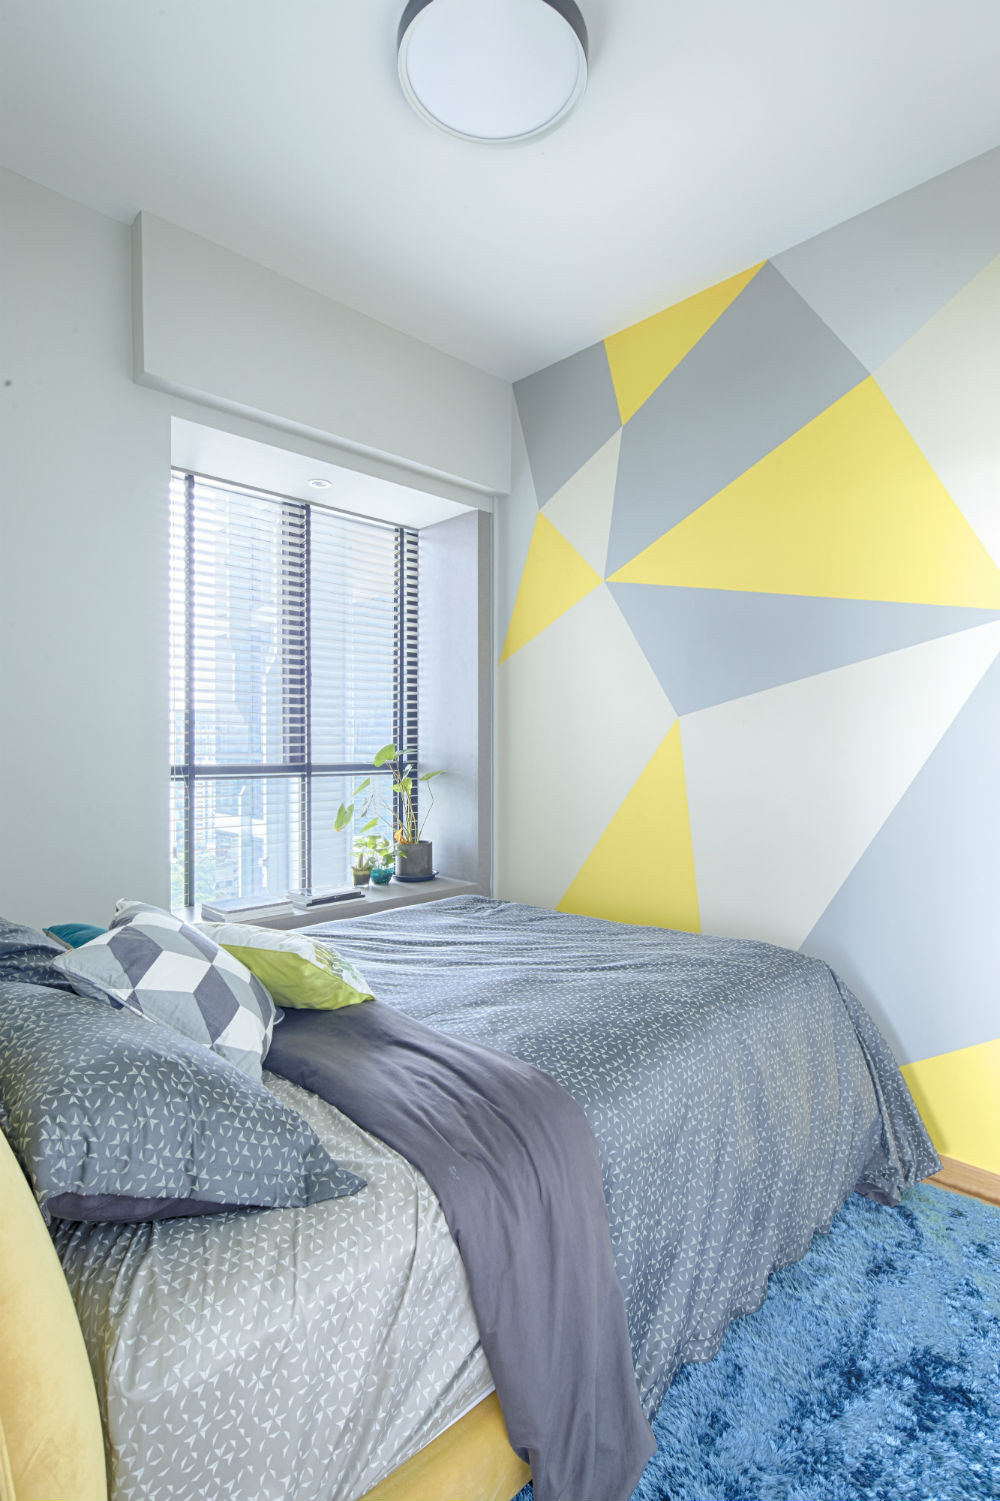 Wall Painting Designs For Bedroom
 A great DIY paint idea for your walls